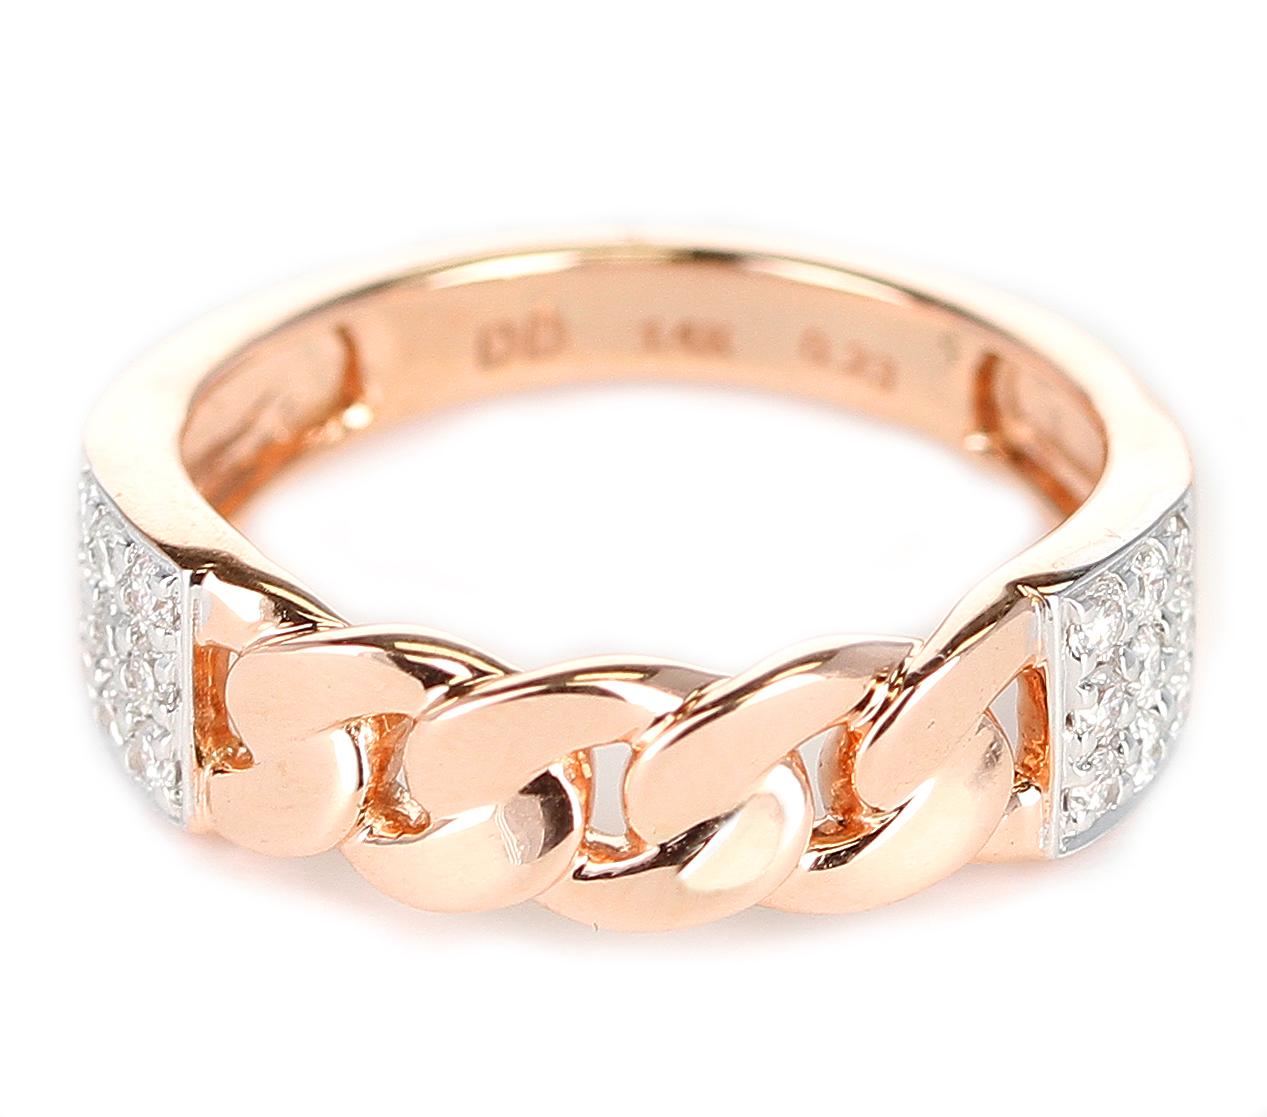 A rope or knot-style ring with 14K Rose Gold and a square diamond design on both sides. Diamond Weight: 0.23 cts Diamonds. Ring Size 6. Signed D'D for D'Deco Jewels. Metal type and stones can be customized. 